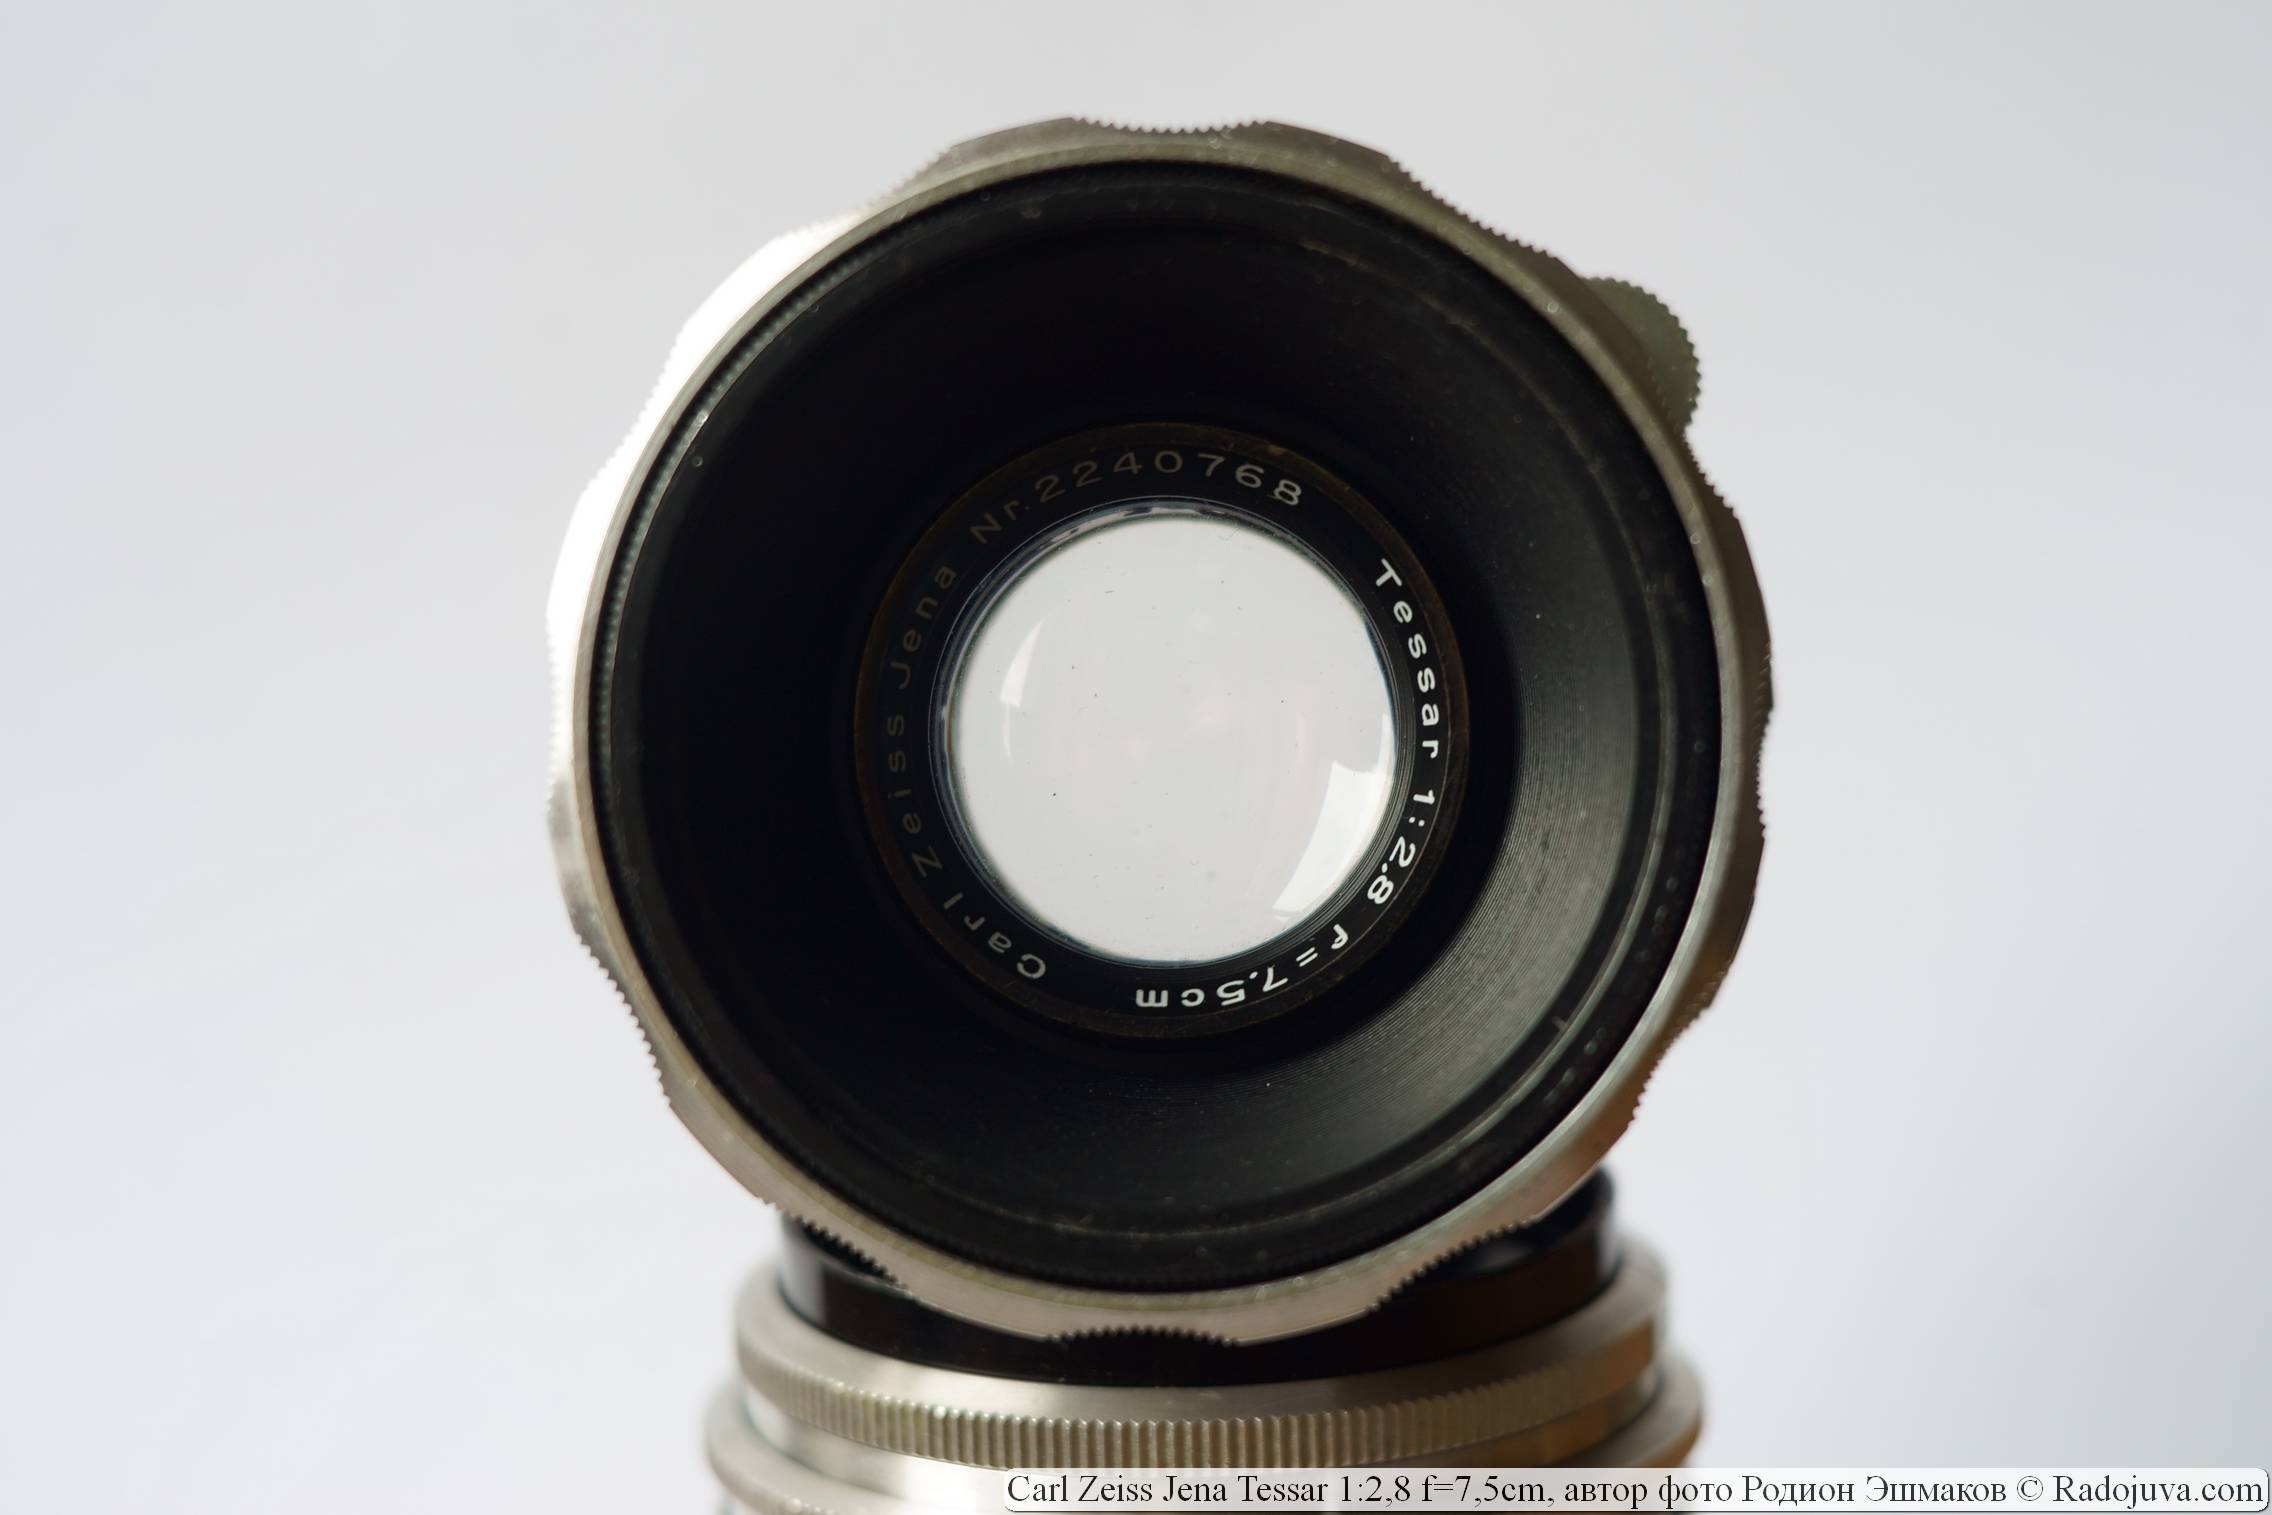 Carl Zeiss Jena Tessar 1: 2,8 f = 7,5cm (1938). Review of an 